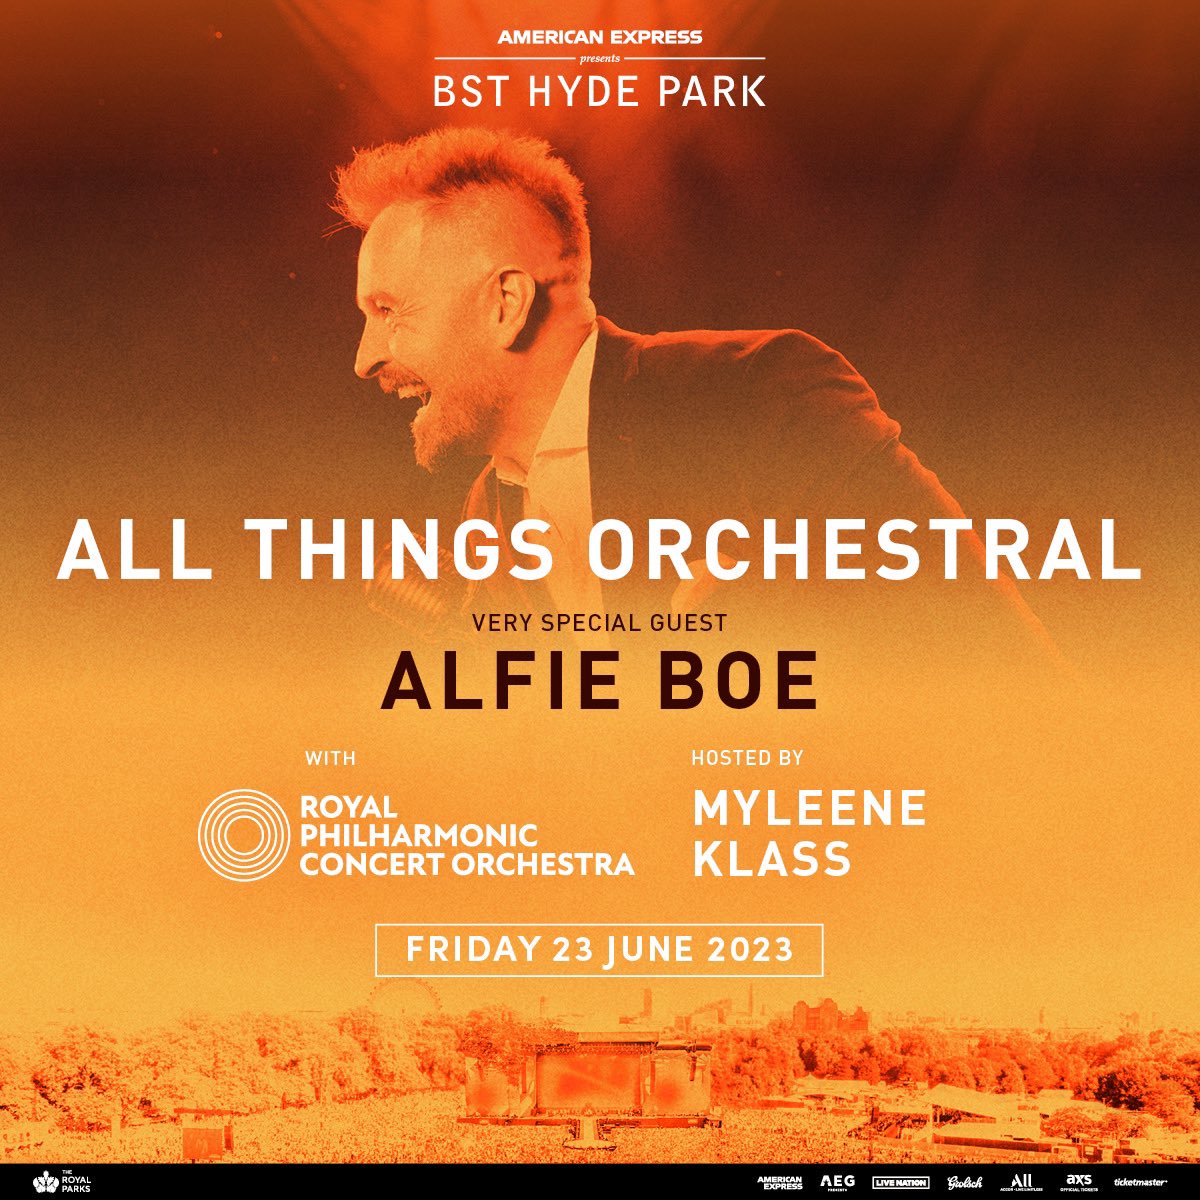 LIVE SHOW NEWS 🎤// @AlfieBoe announced for All Things Orchestral event at BST Hyde Park this June.